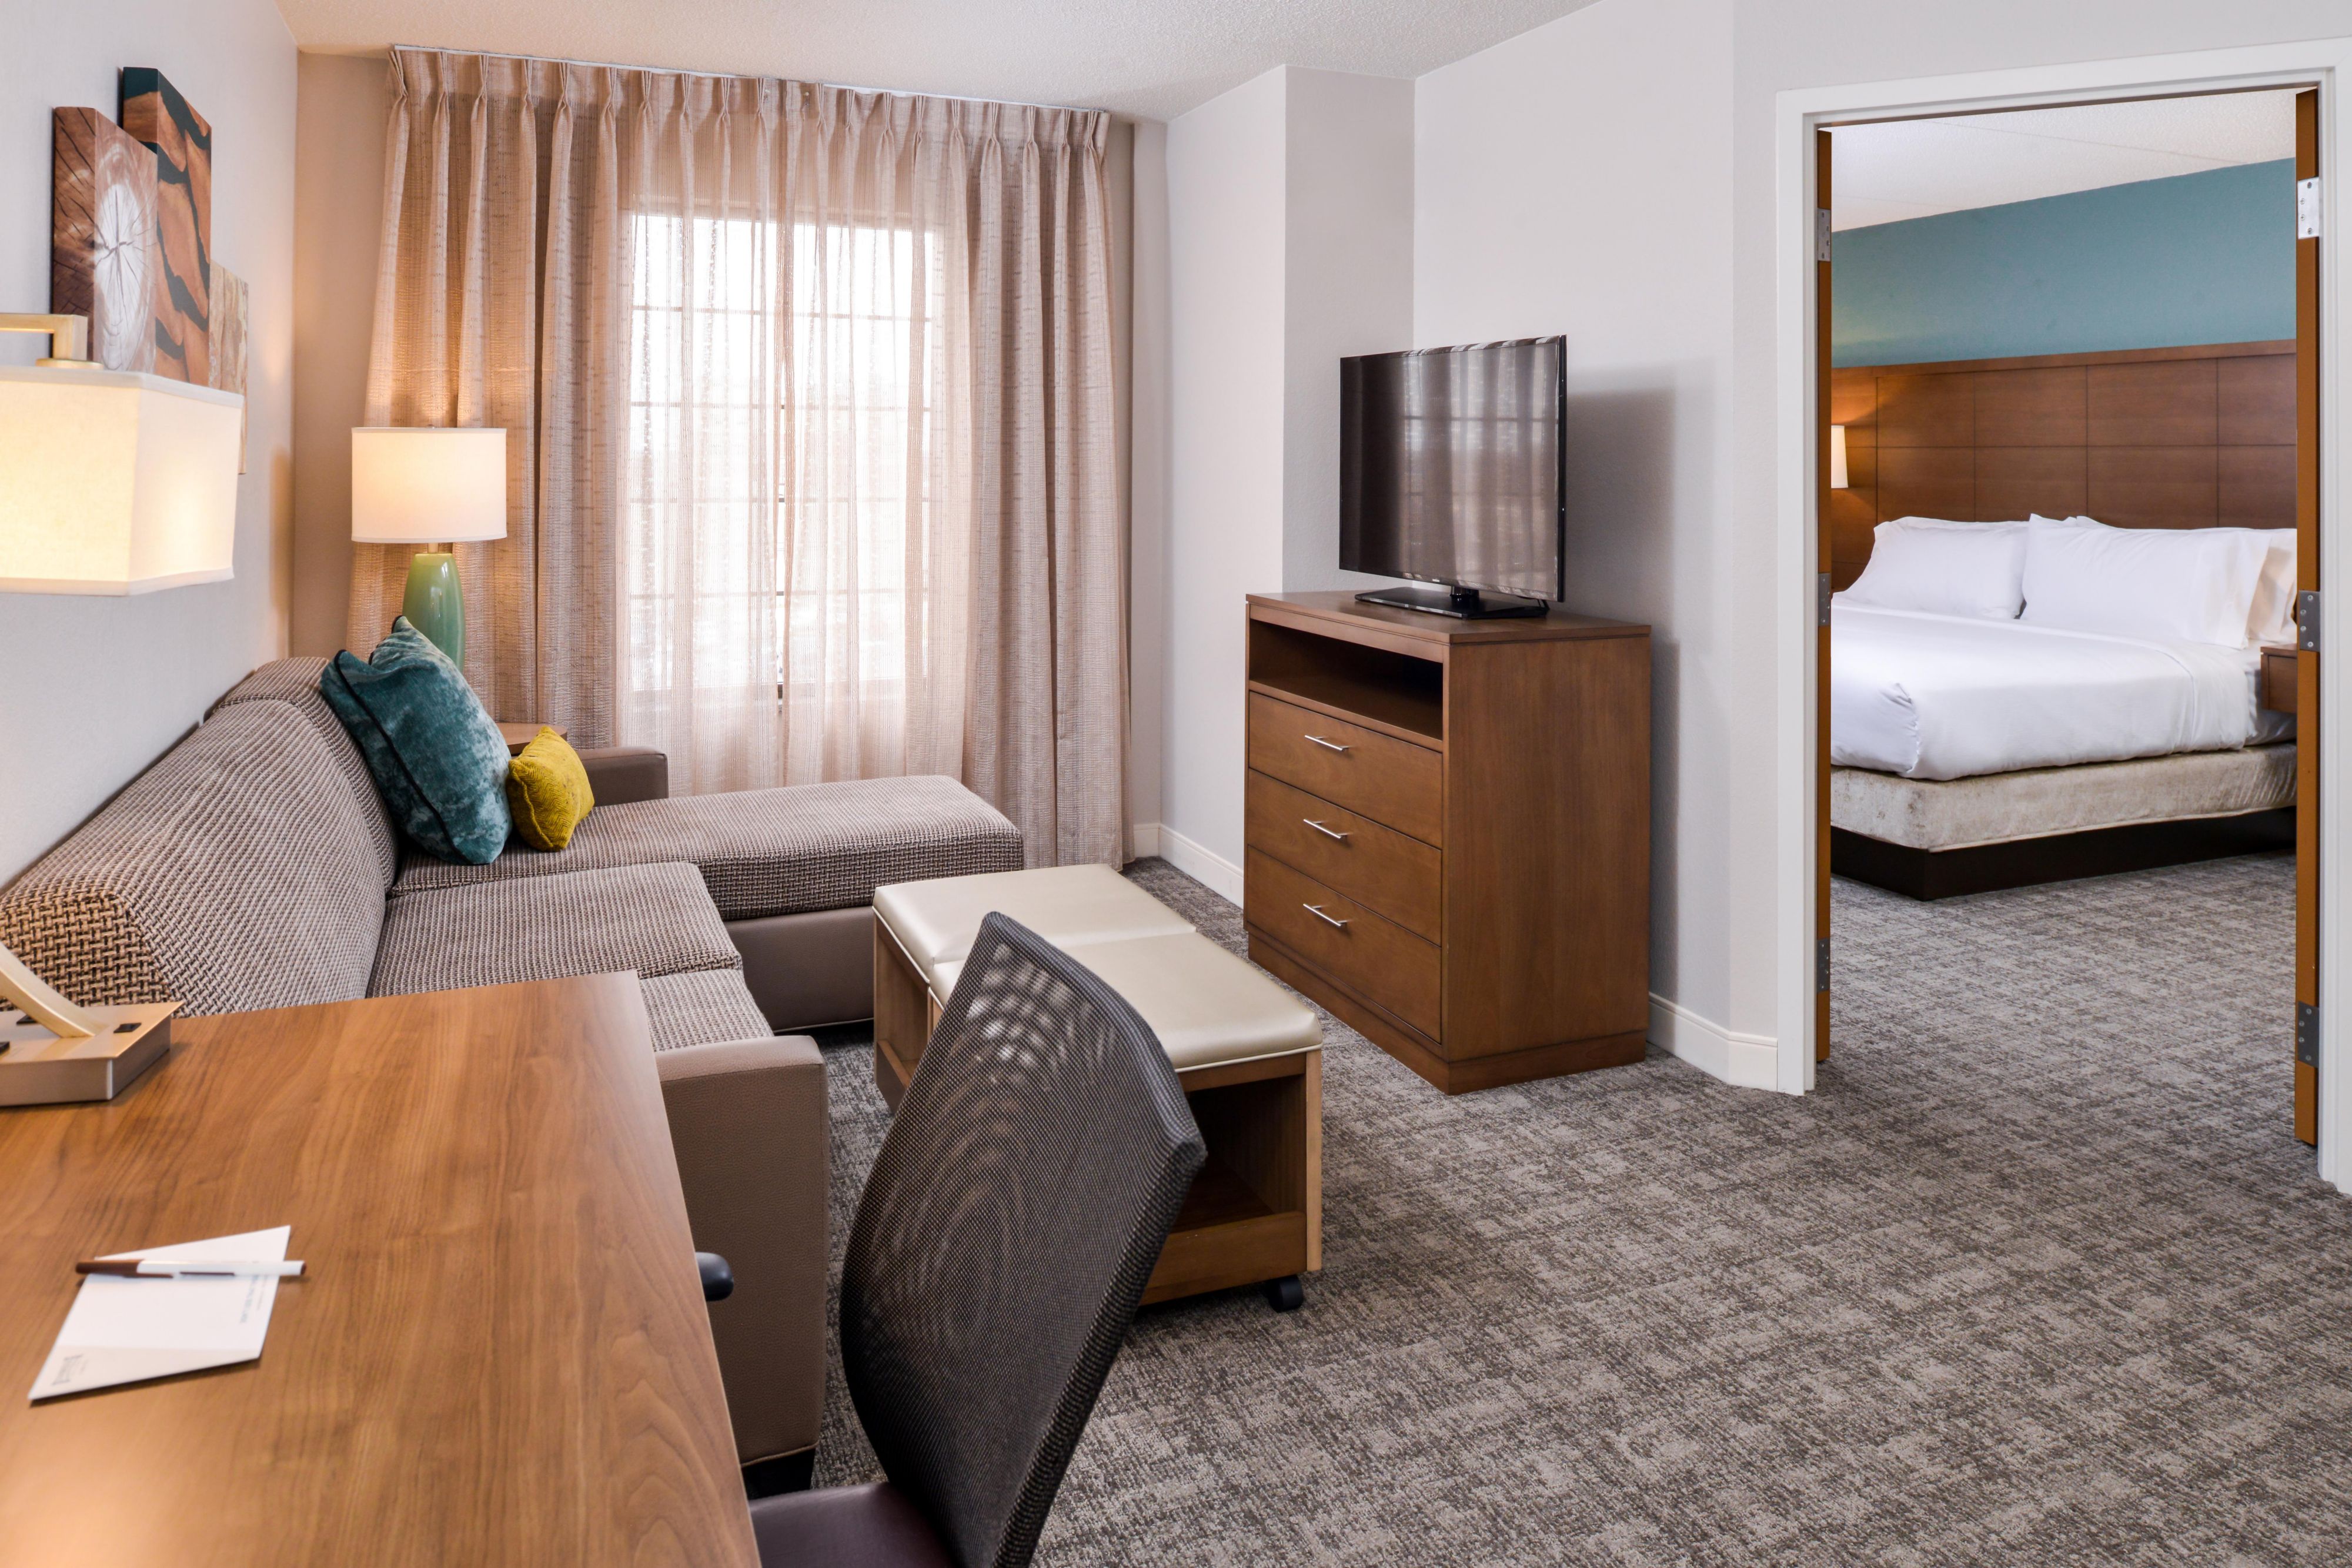 Get cozy and enjoy a great night's sleep in our newly renovated extended stay guest rooms. All of our new modern rooms include a kitchens, complimentary Wi-Fi access and free hot breakfast in the morning.  Book your next stay at the Staybridge Suites Downtown Indianapolis Convention Center!